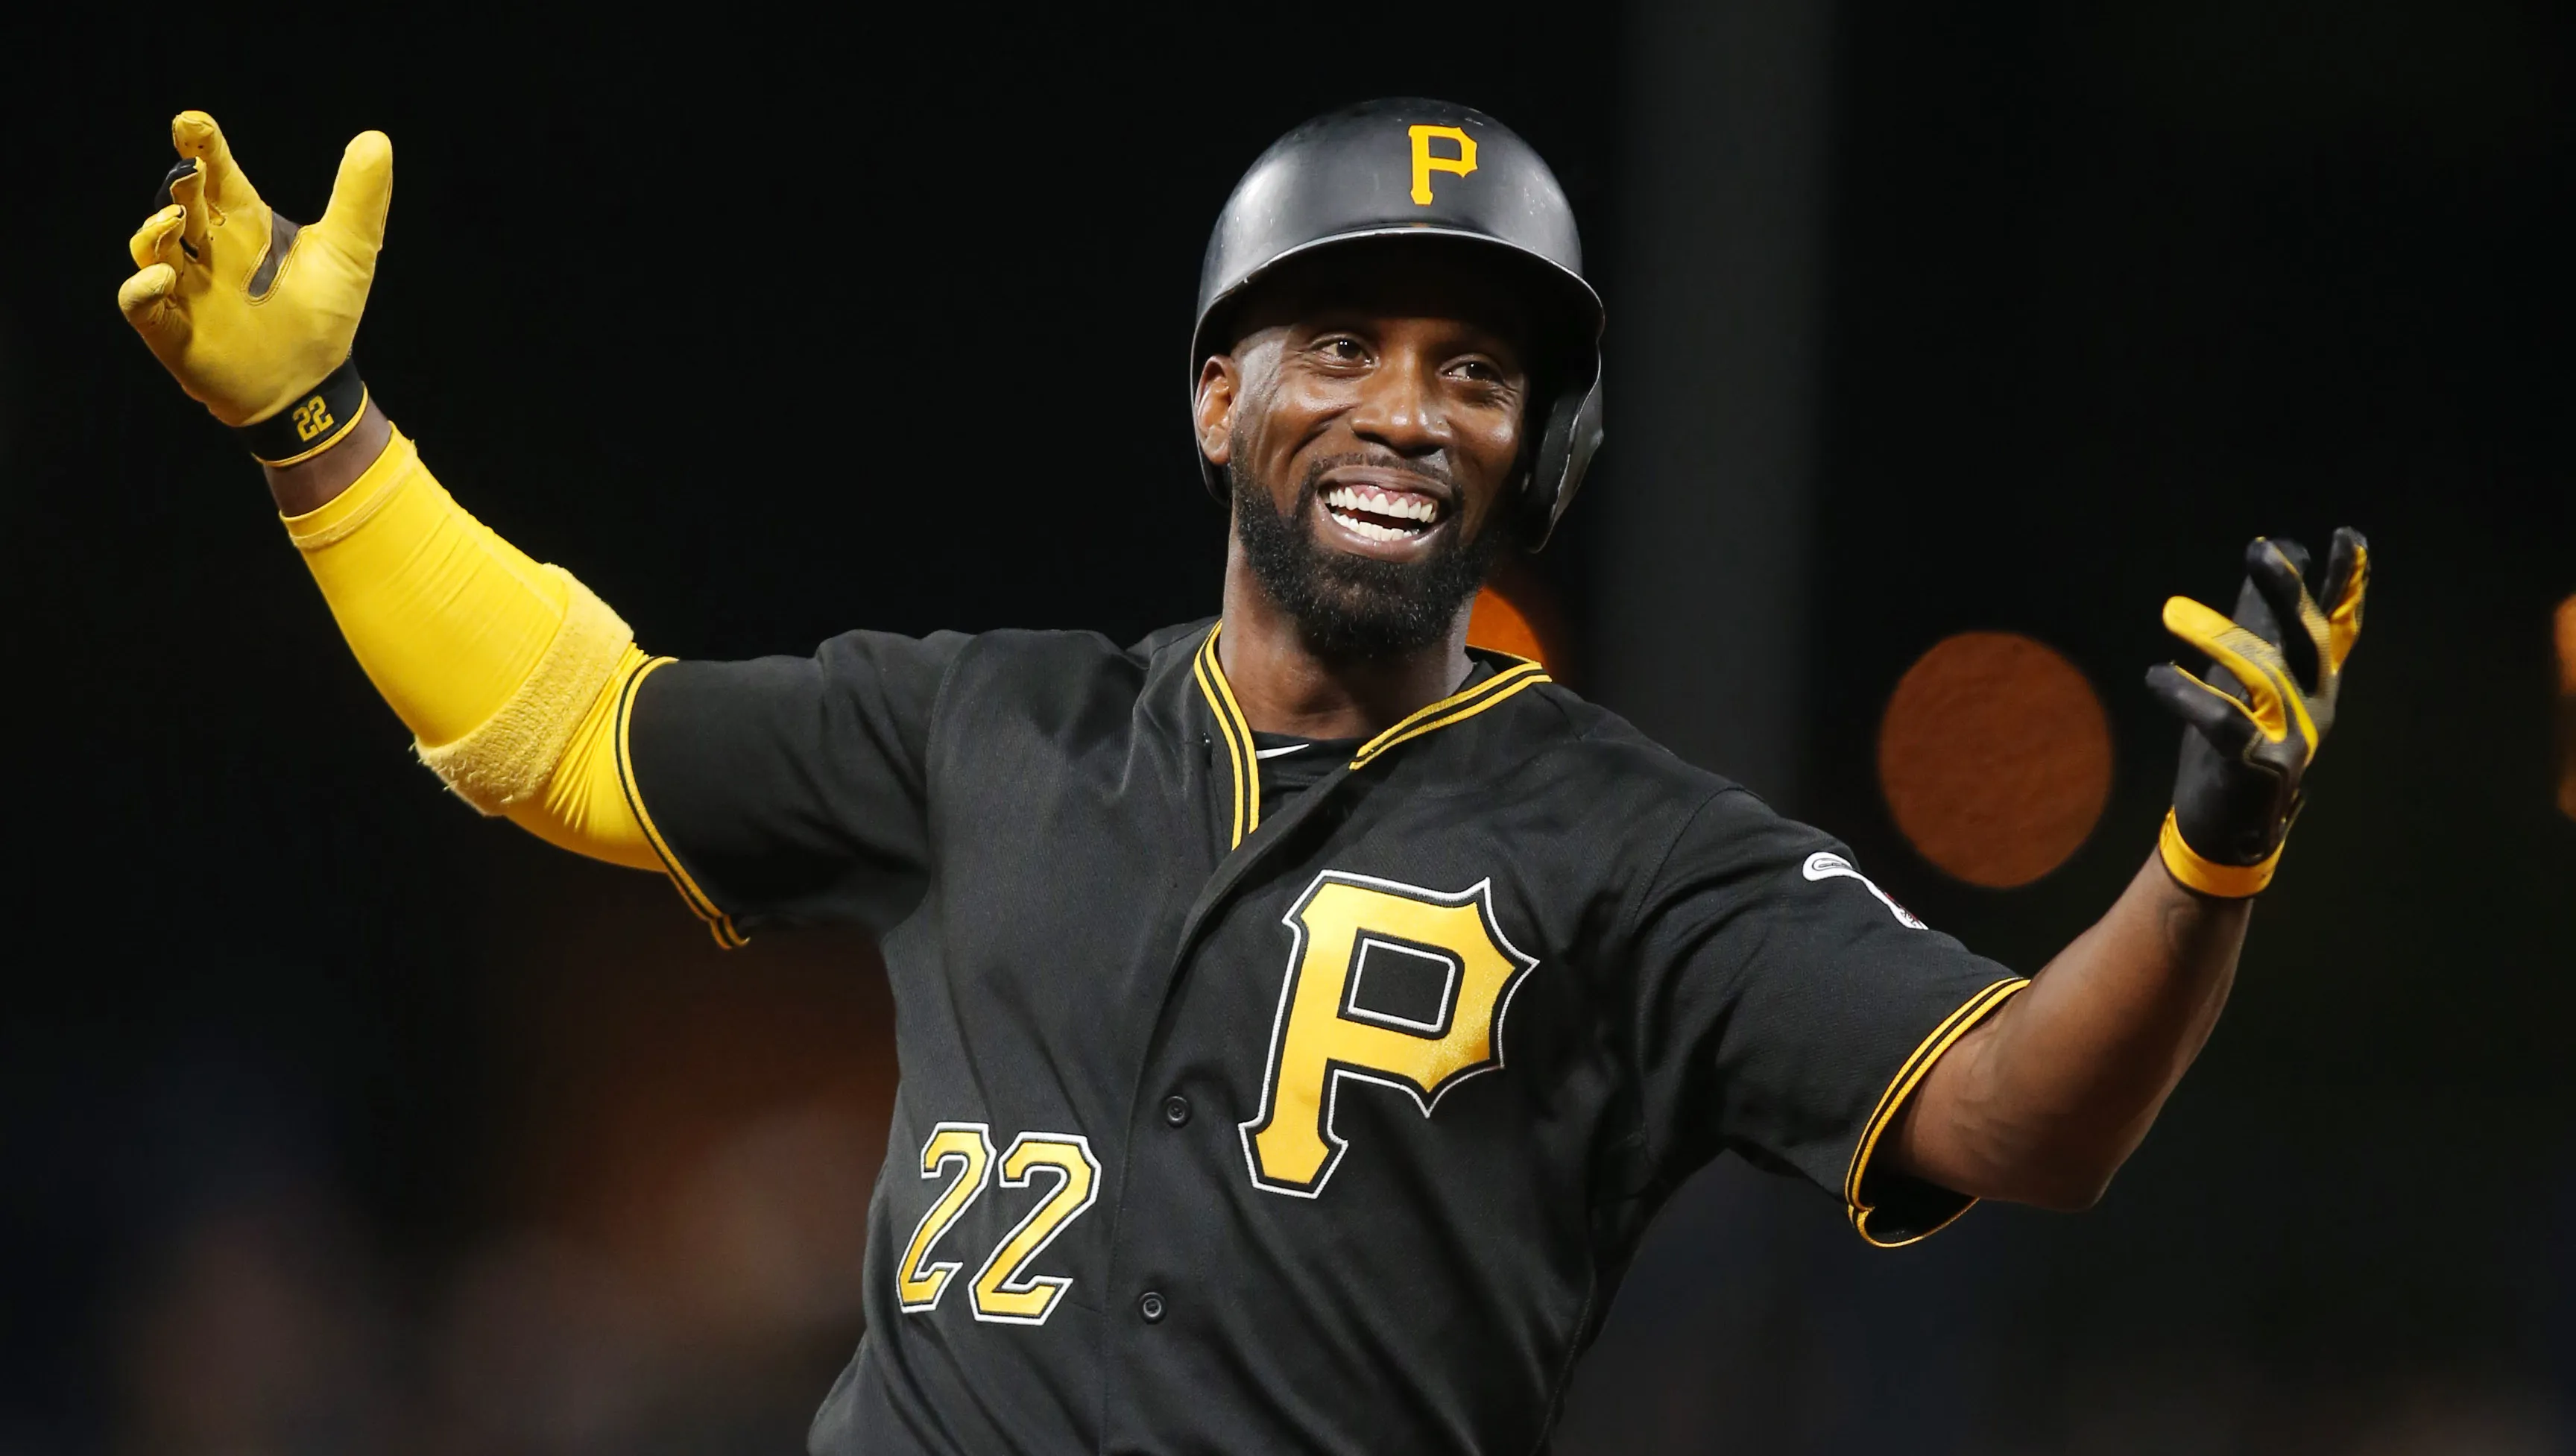 Will Phillies' Andrew McCutchen still be elite after return from